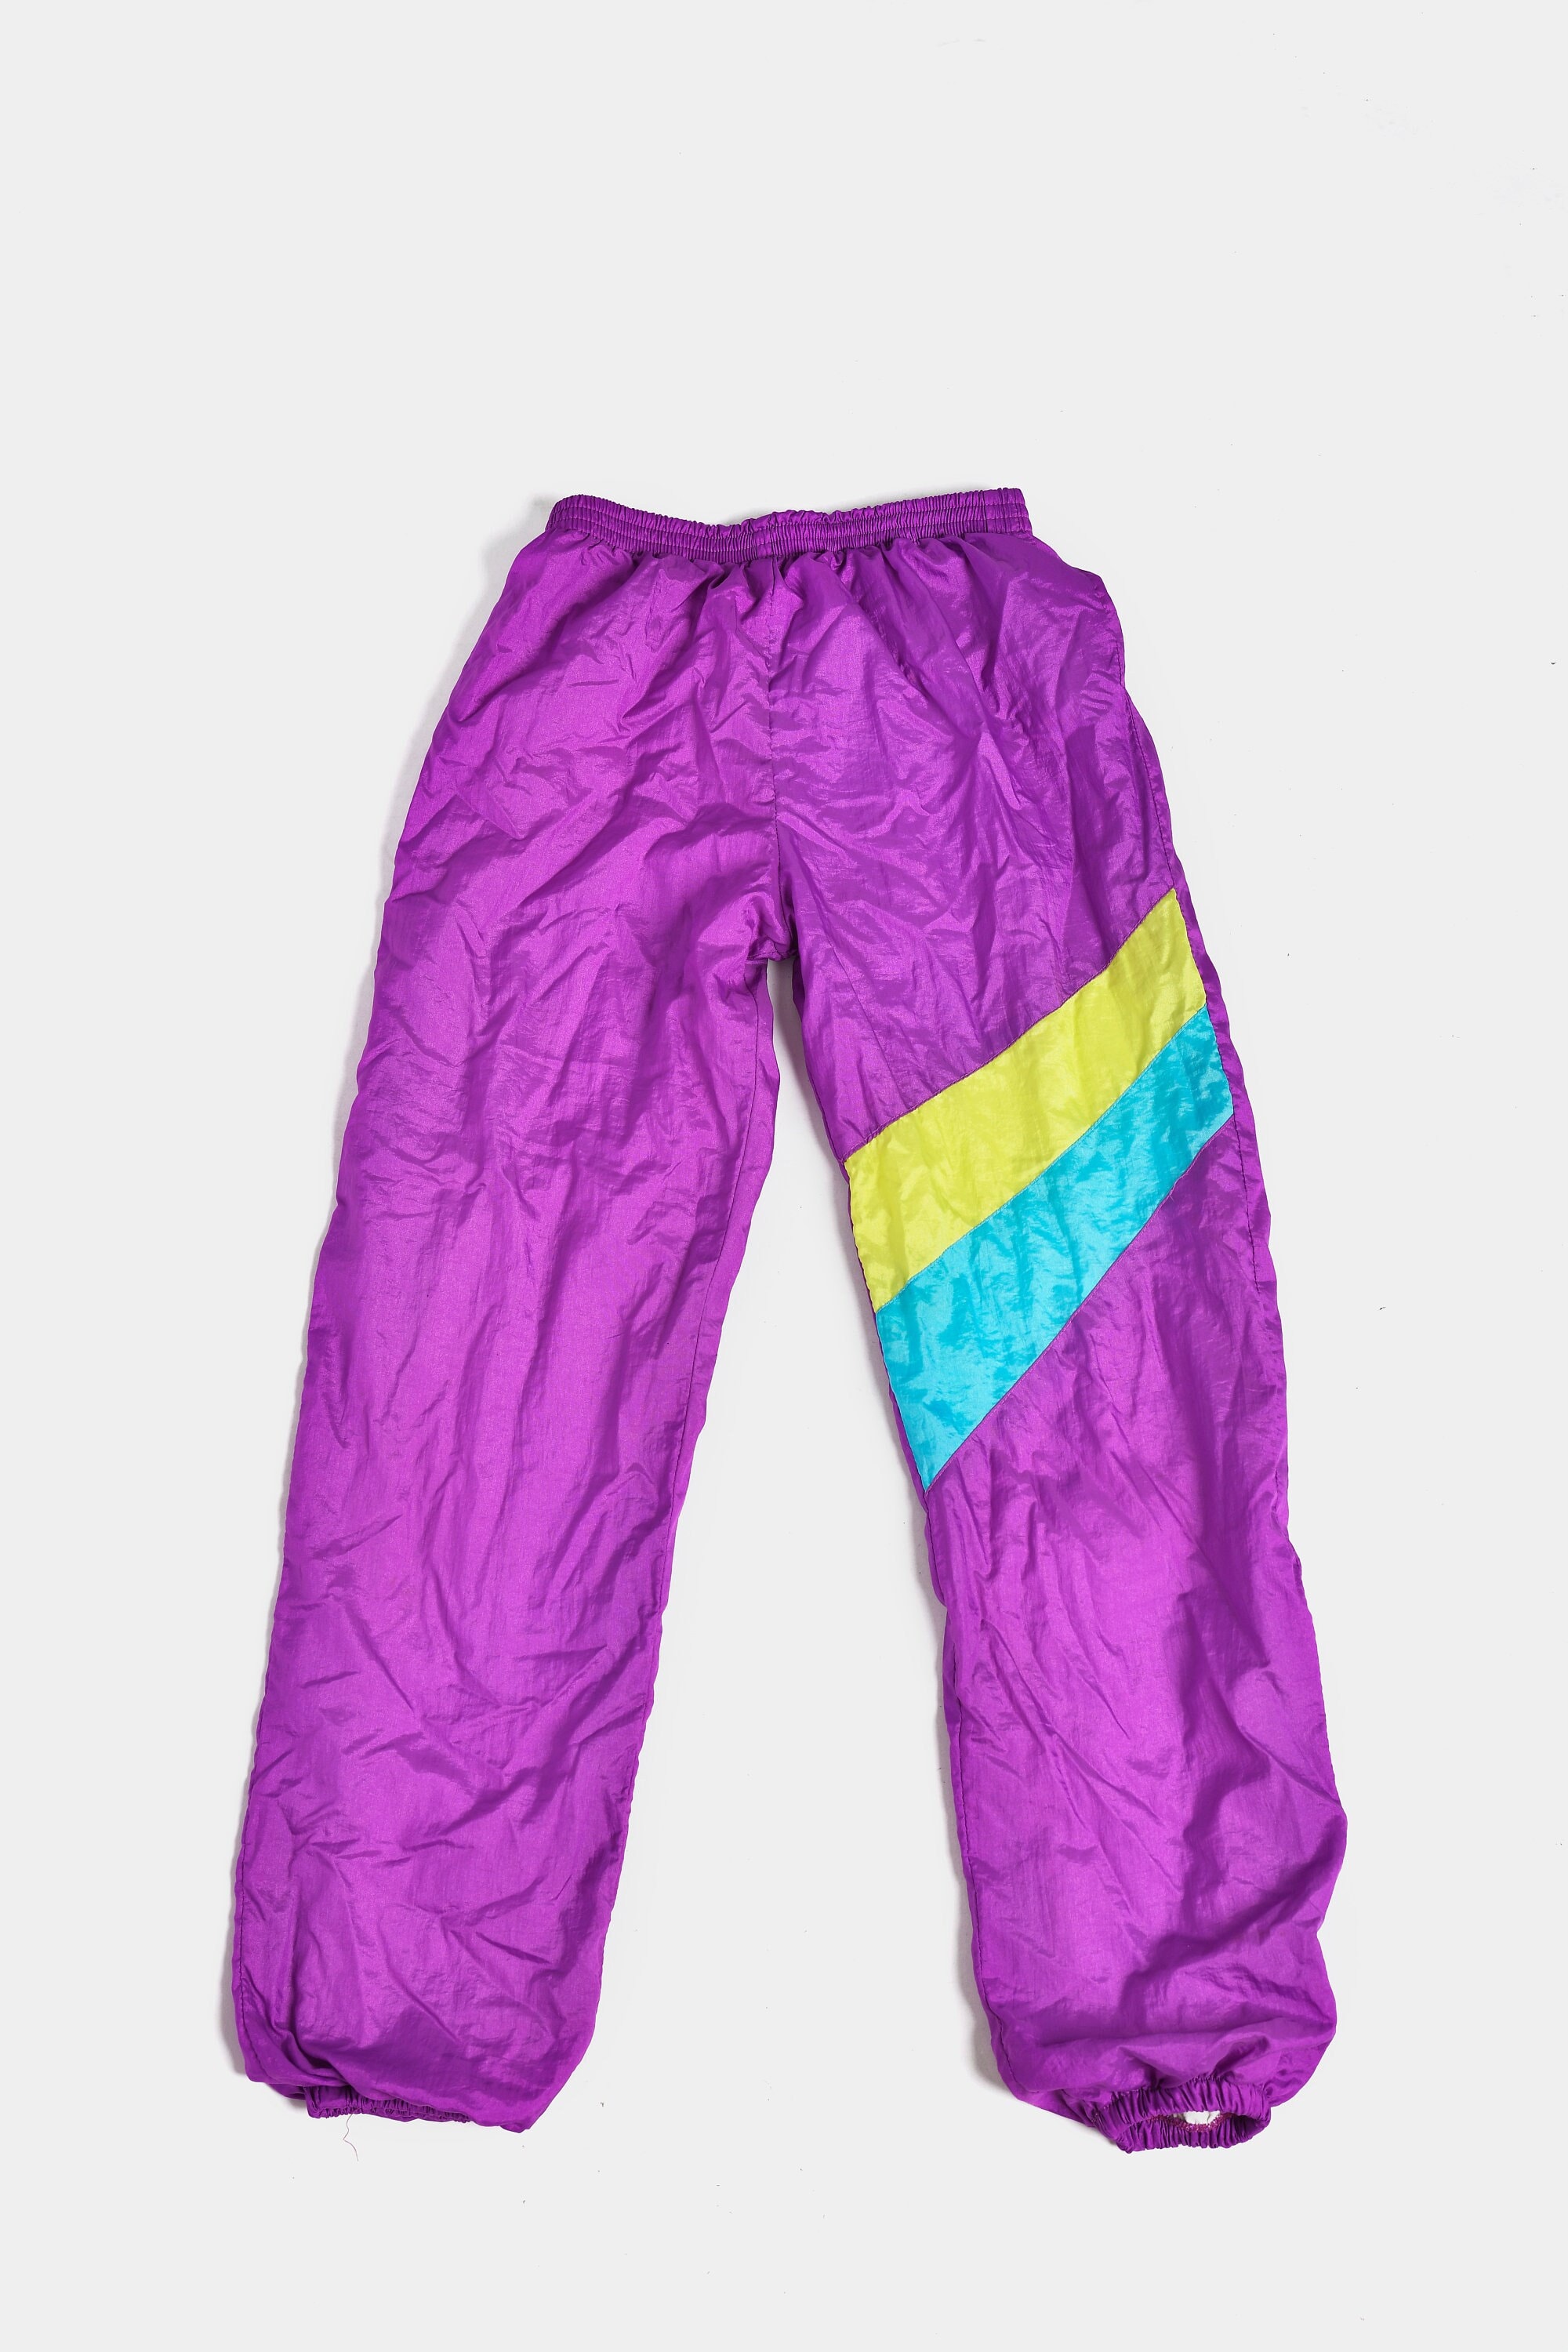 Pink Pants Neon Colors Women Track Pants Vintage 80s Windbreaker Pants  Running Trousers Sporty Athletic Gym Workout Elastic Waist Large Size -   Canada